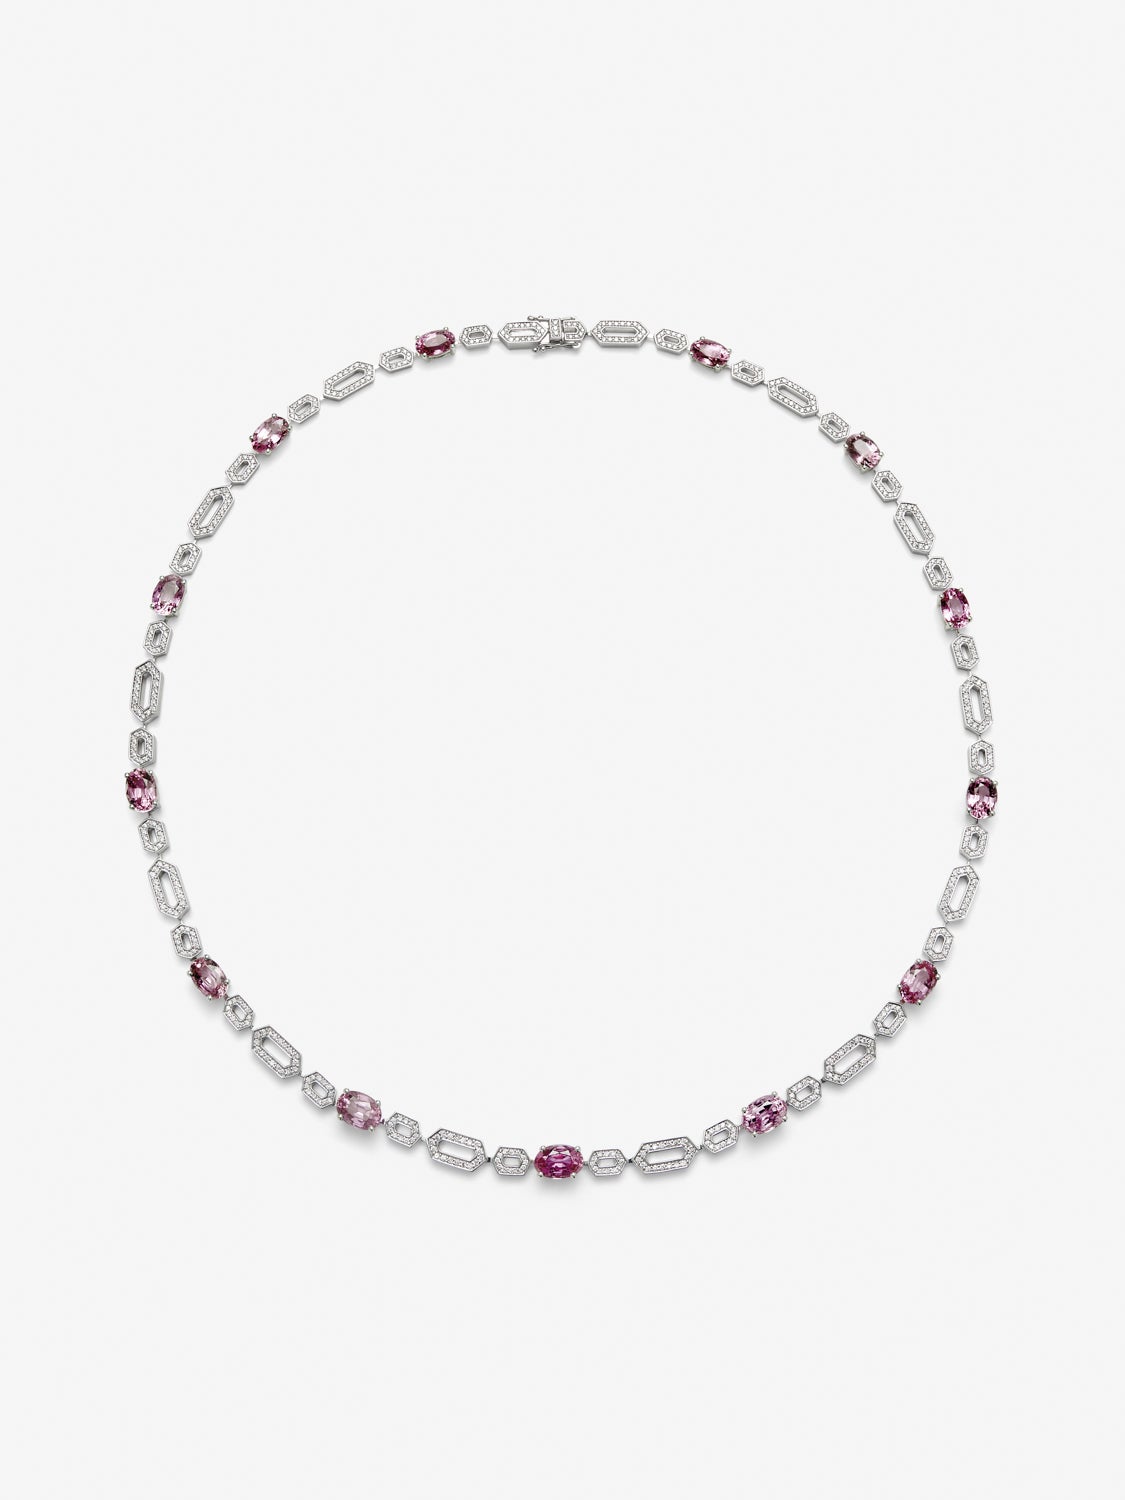 18K white gold necklace with 13 oval-cut vivid pink sapphires with a total of 14.43 cts and 572 brilliant-cut diamonds with a total of 1.73 cts